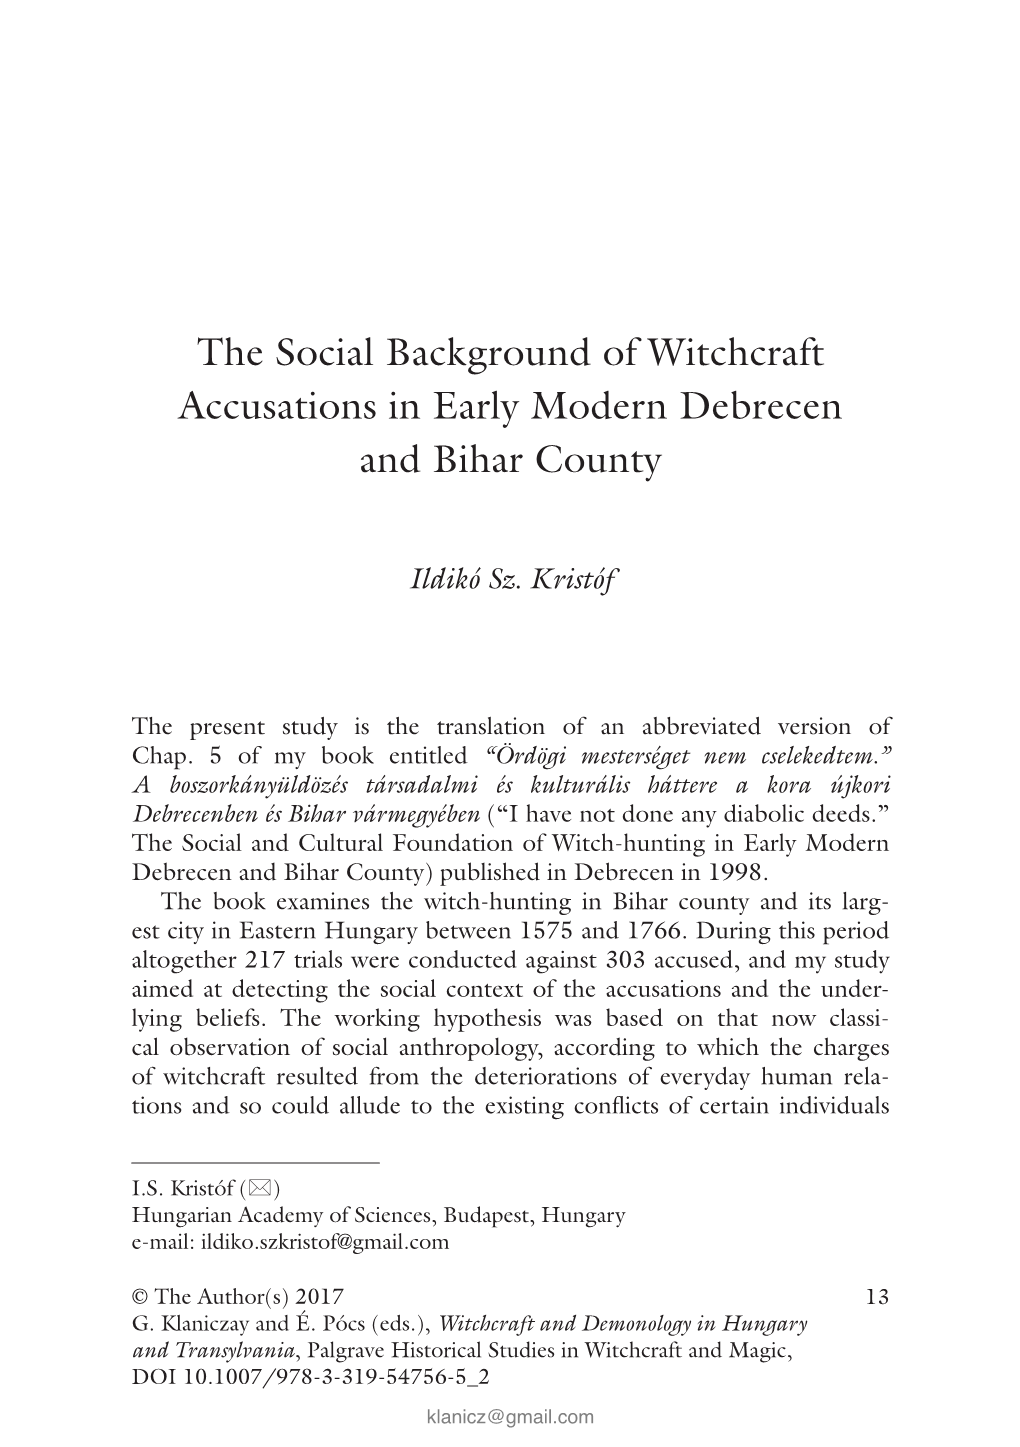 The Social Background of Witchcraft Accusations in Early Modern Debrecen and Bihar County